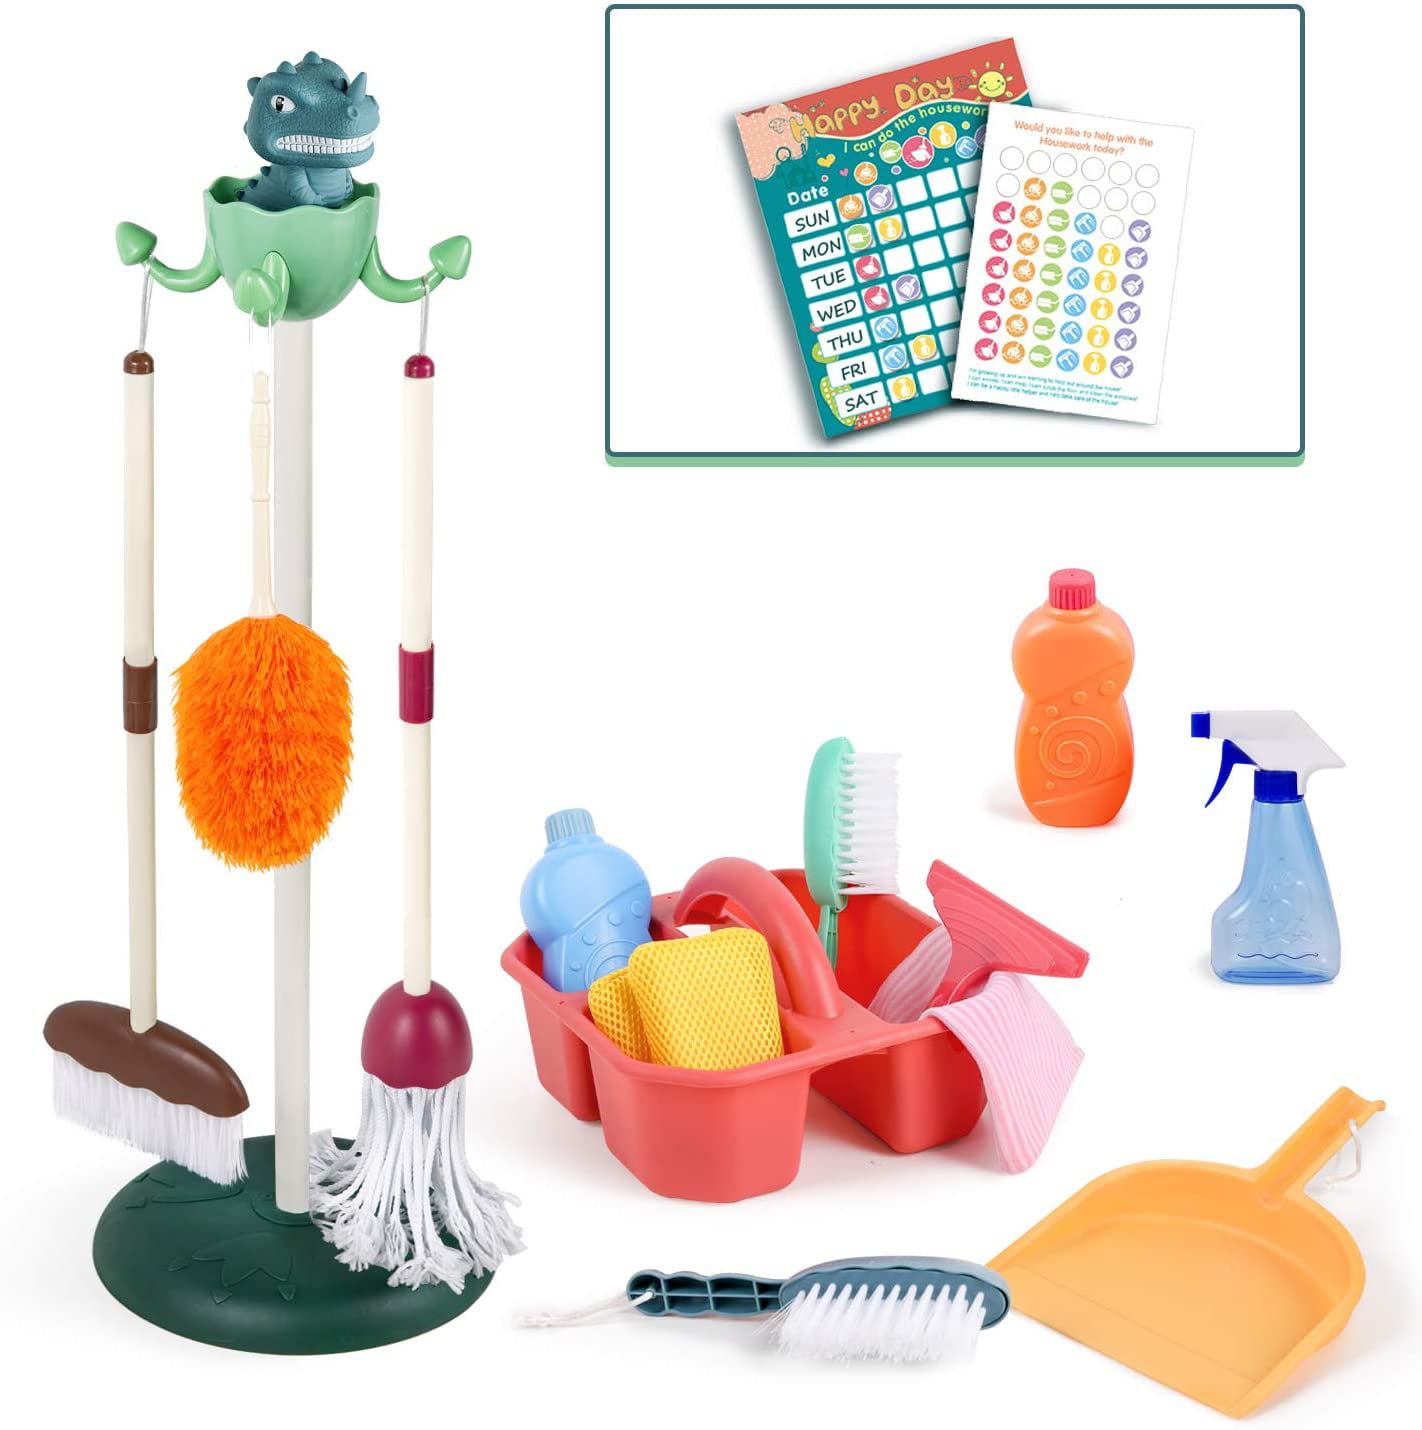 Includes 10 Cleaning Toys and Housekeeping Accessories for Pretend Play and Sweeping House Funspread Kids Cleaning Set